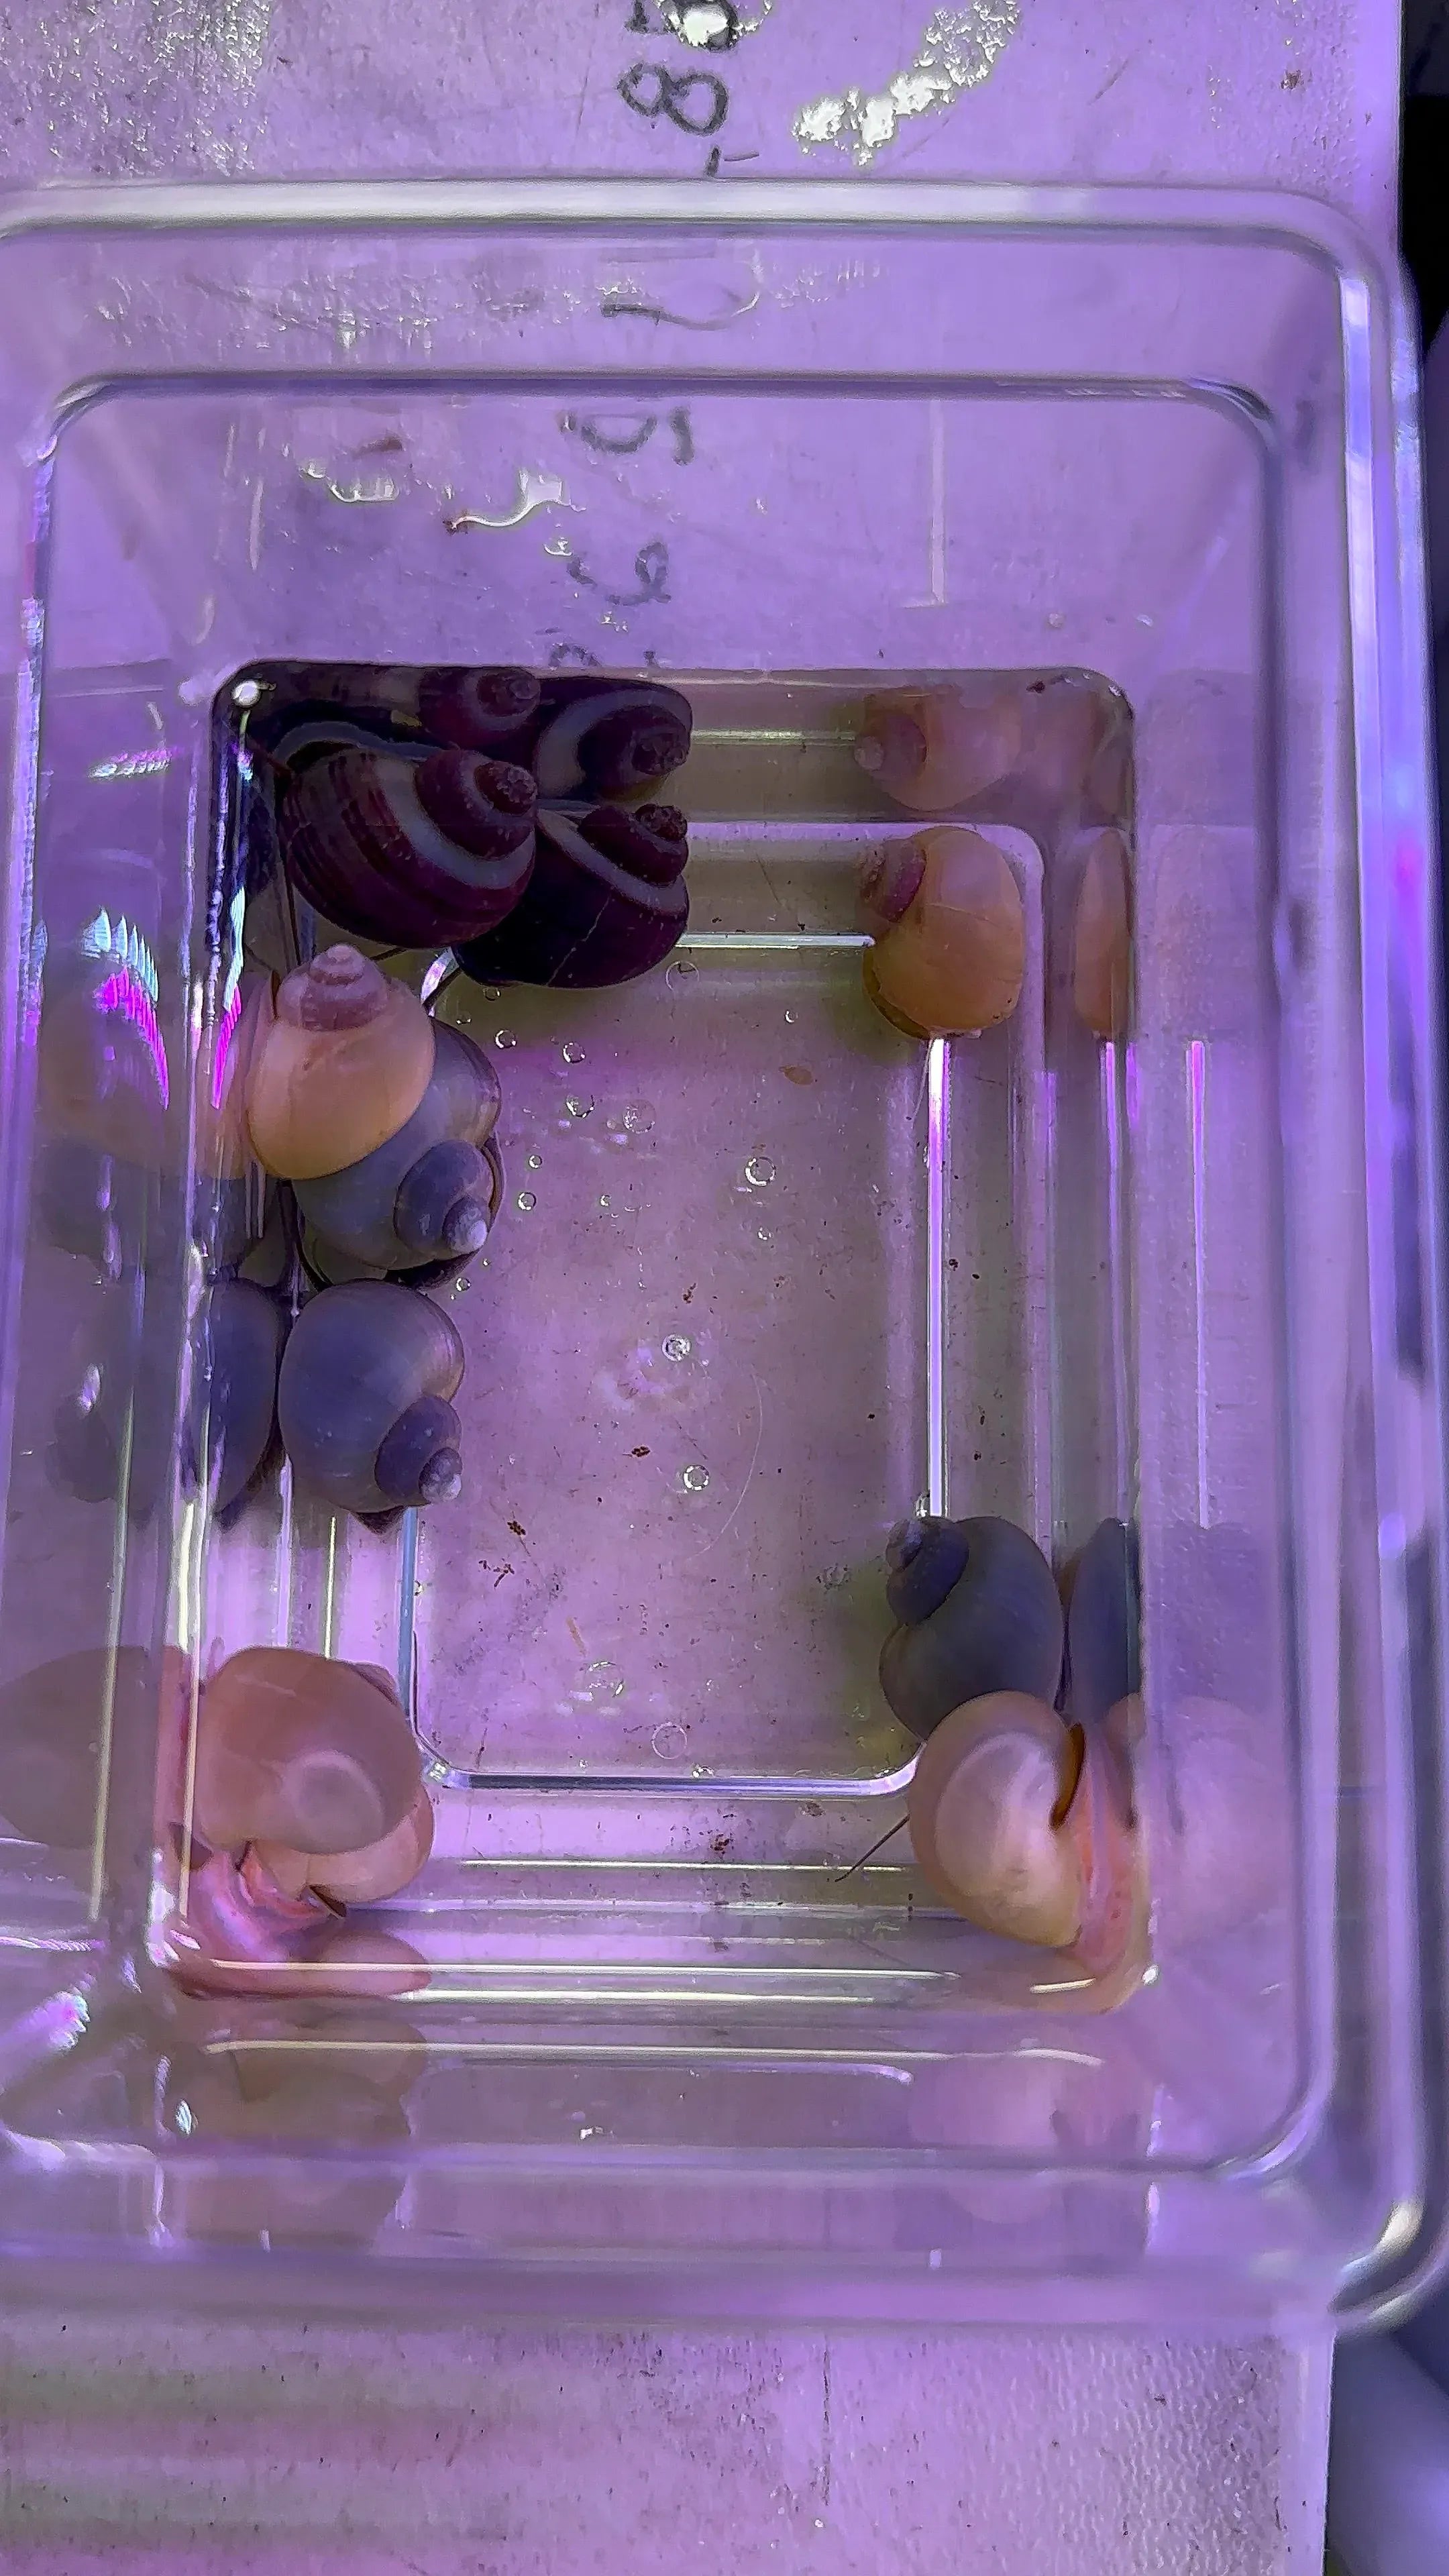 Rare Mystery Snails package